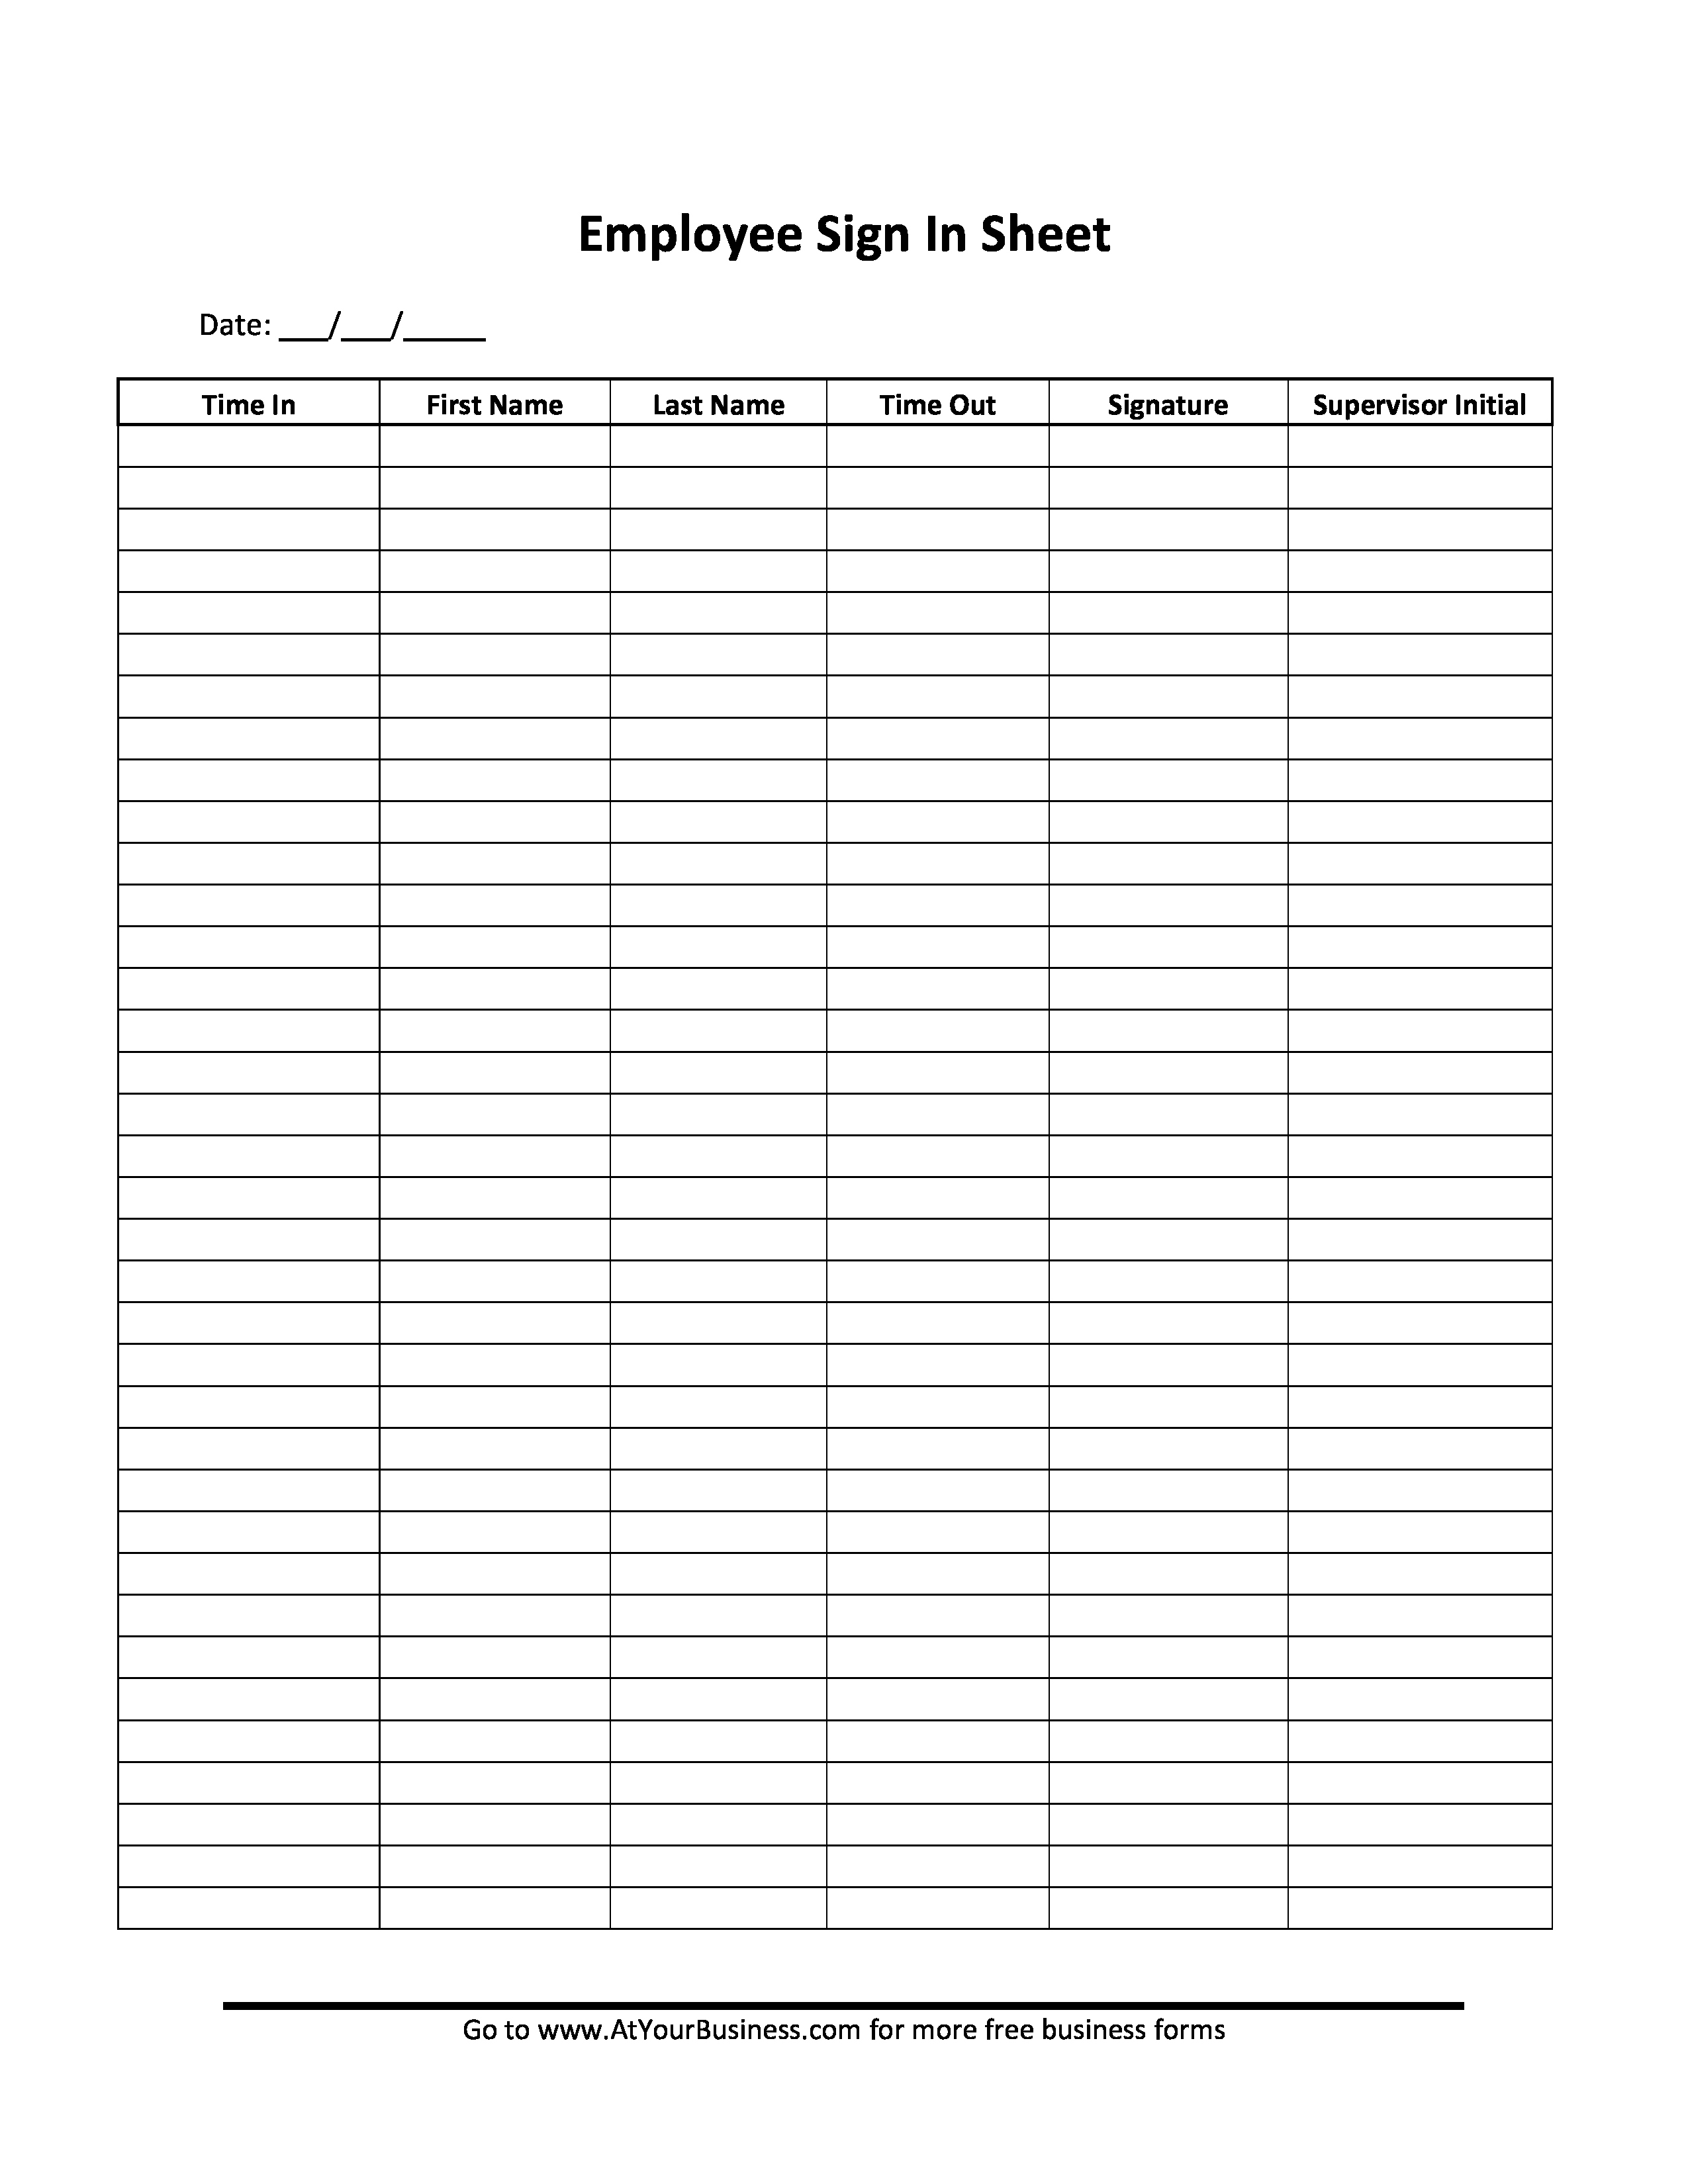 Employees Sign In Sheet Fresh Free Sign In Sheet Picture – Meeting Sign In Sheet